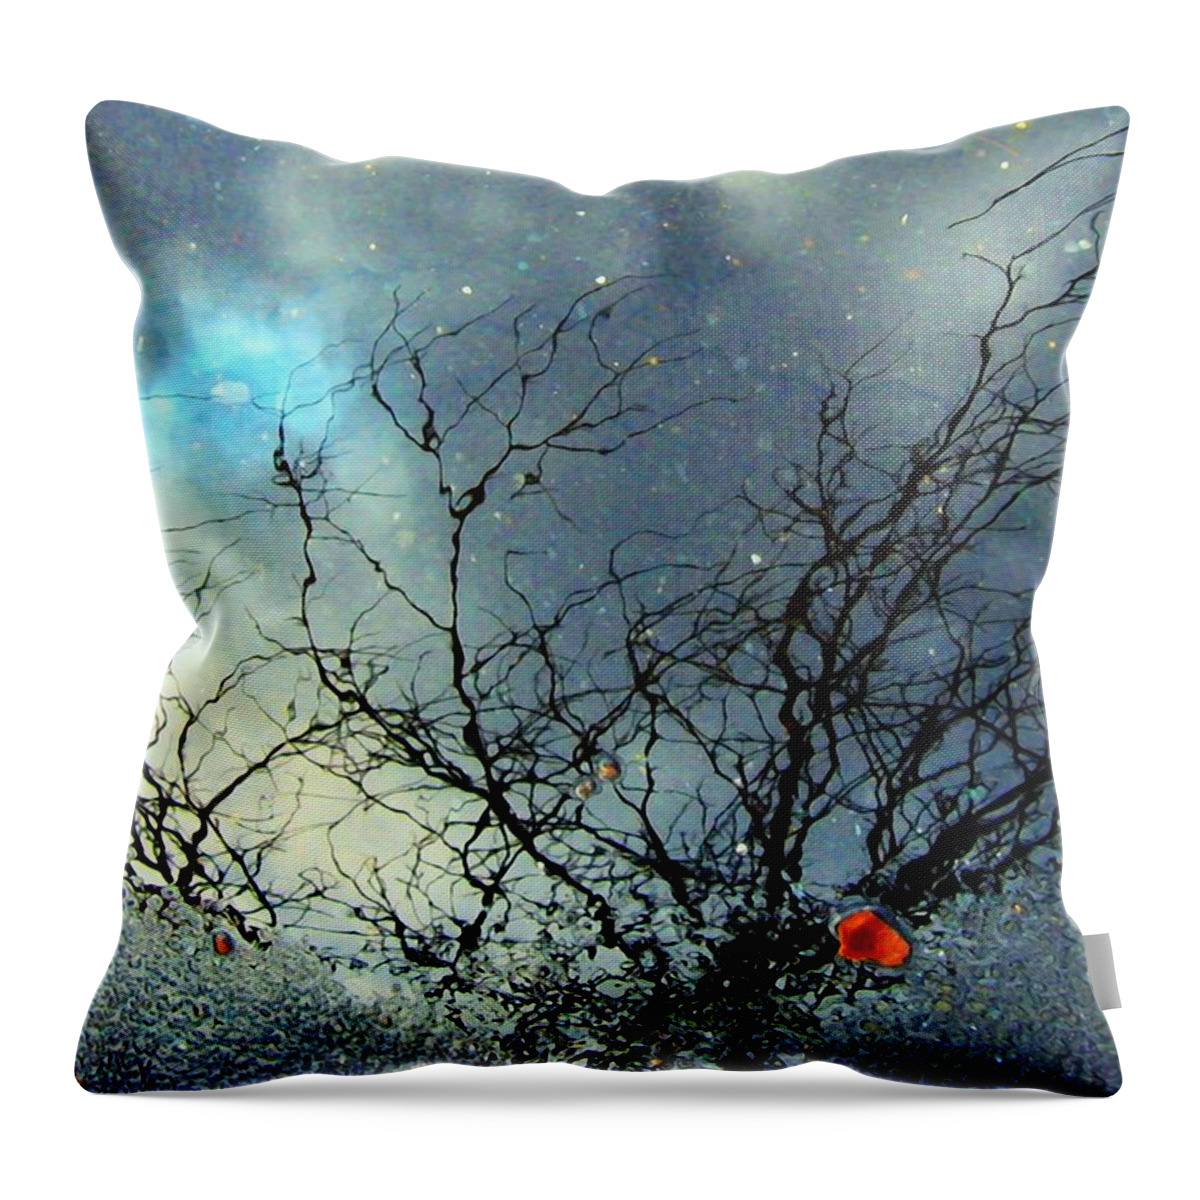 Greeting Cards Throw Pillow featuring the digital art Puddle Art #1 by Dale  Ford